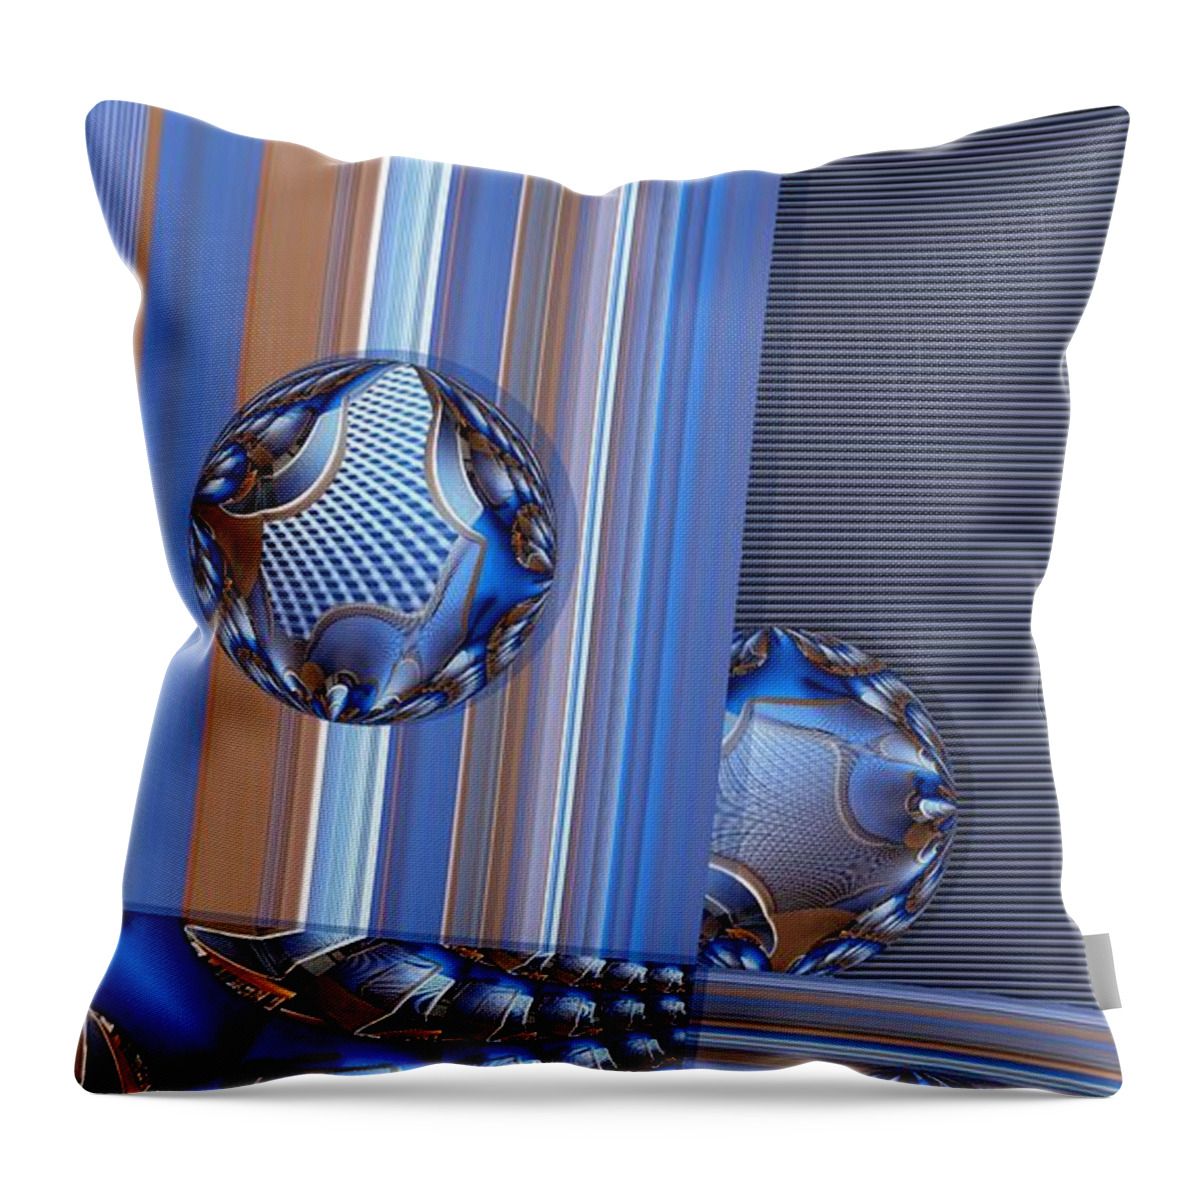 Abstract Throw Pillow featuring the digital art Square with Circles by Ronald Bissett